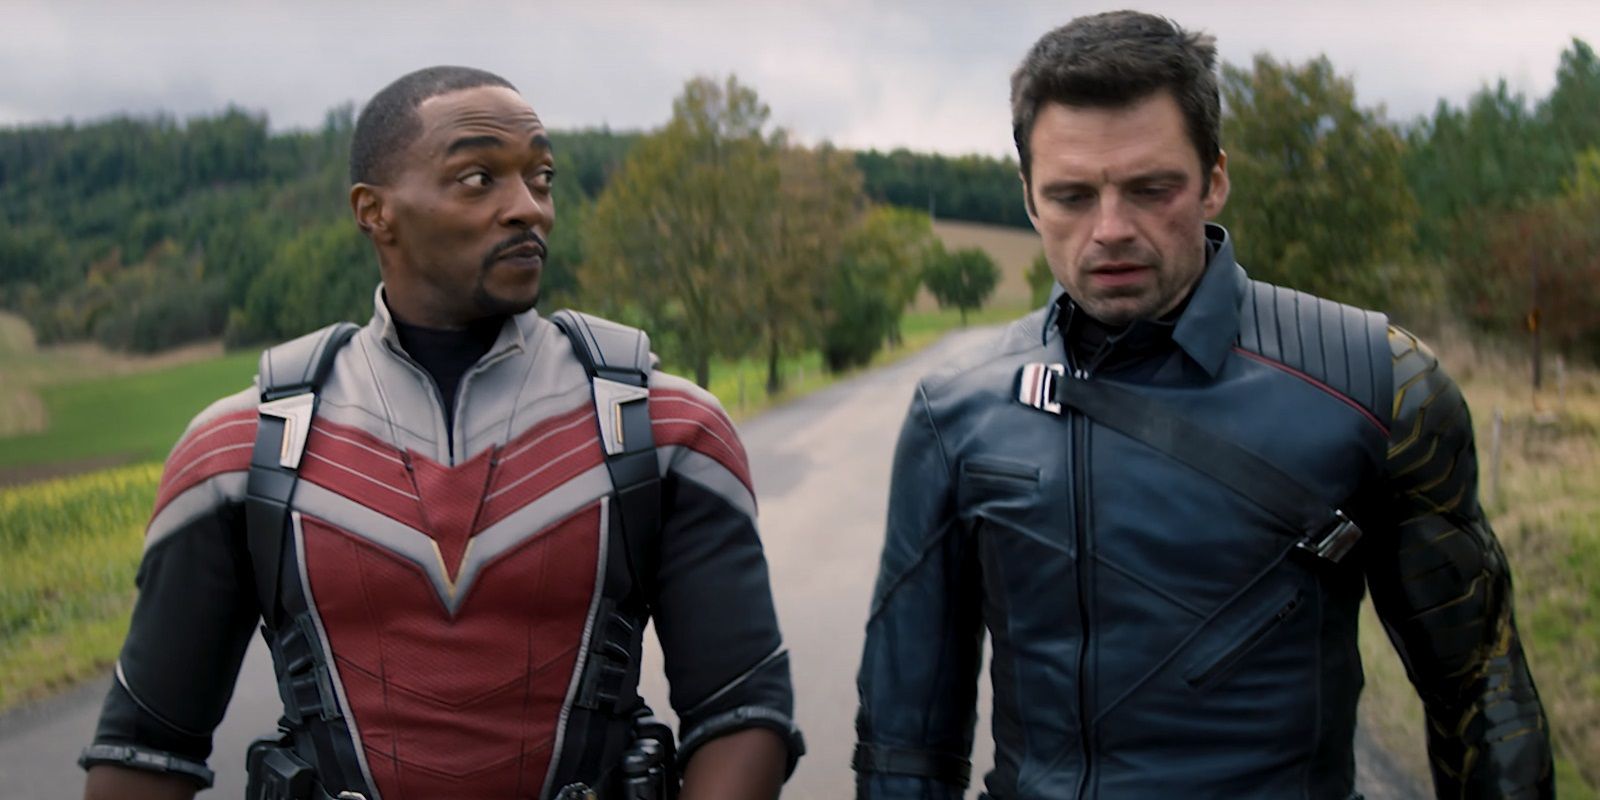 Anthony Mackie and Sebastian Stan as Sam and Bucky in The Falcon and the Winter Soldier